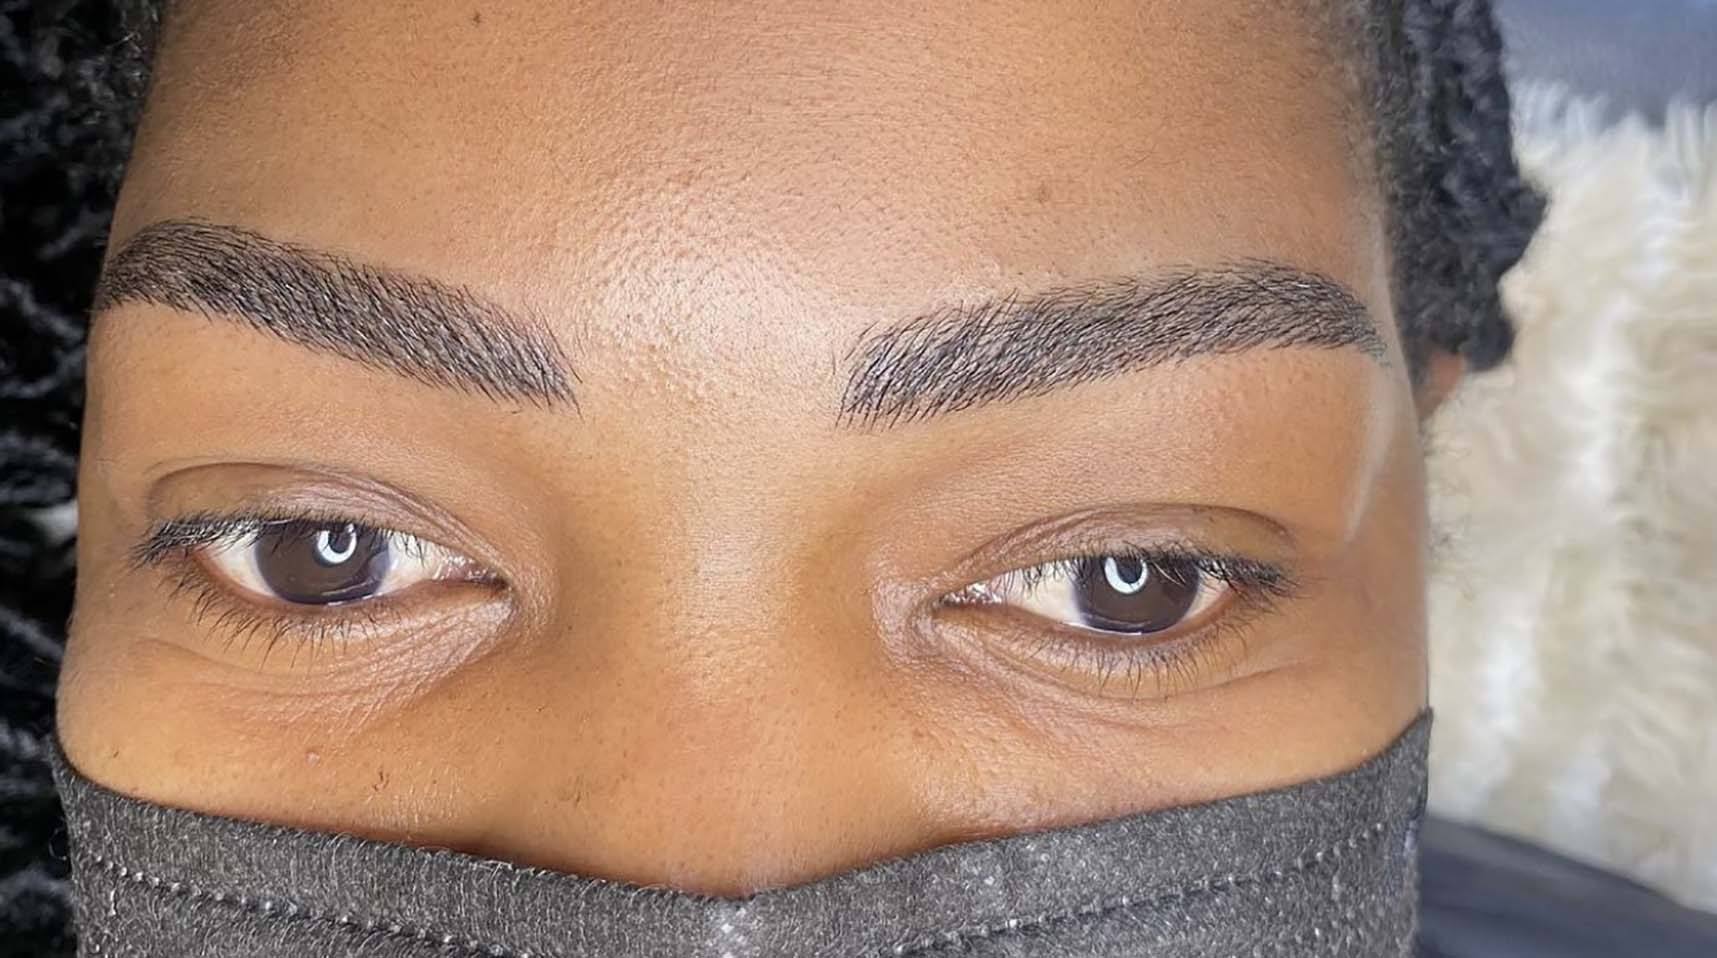 The new “eyebrow” raising trend in town | The Sunday Mail